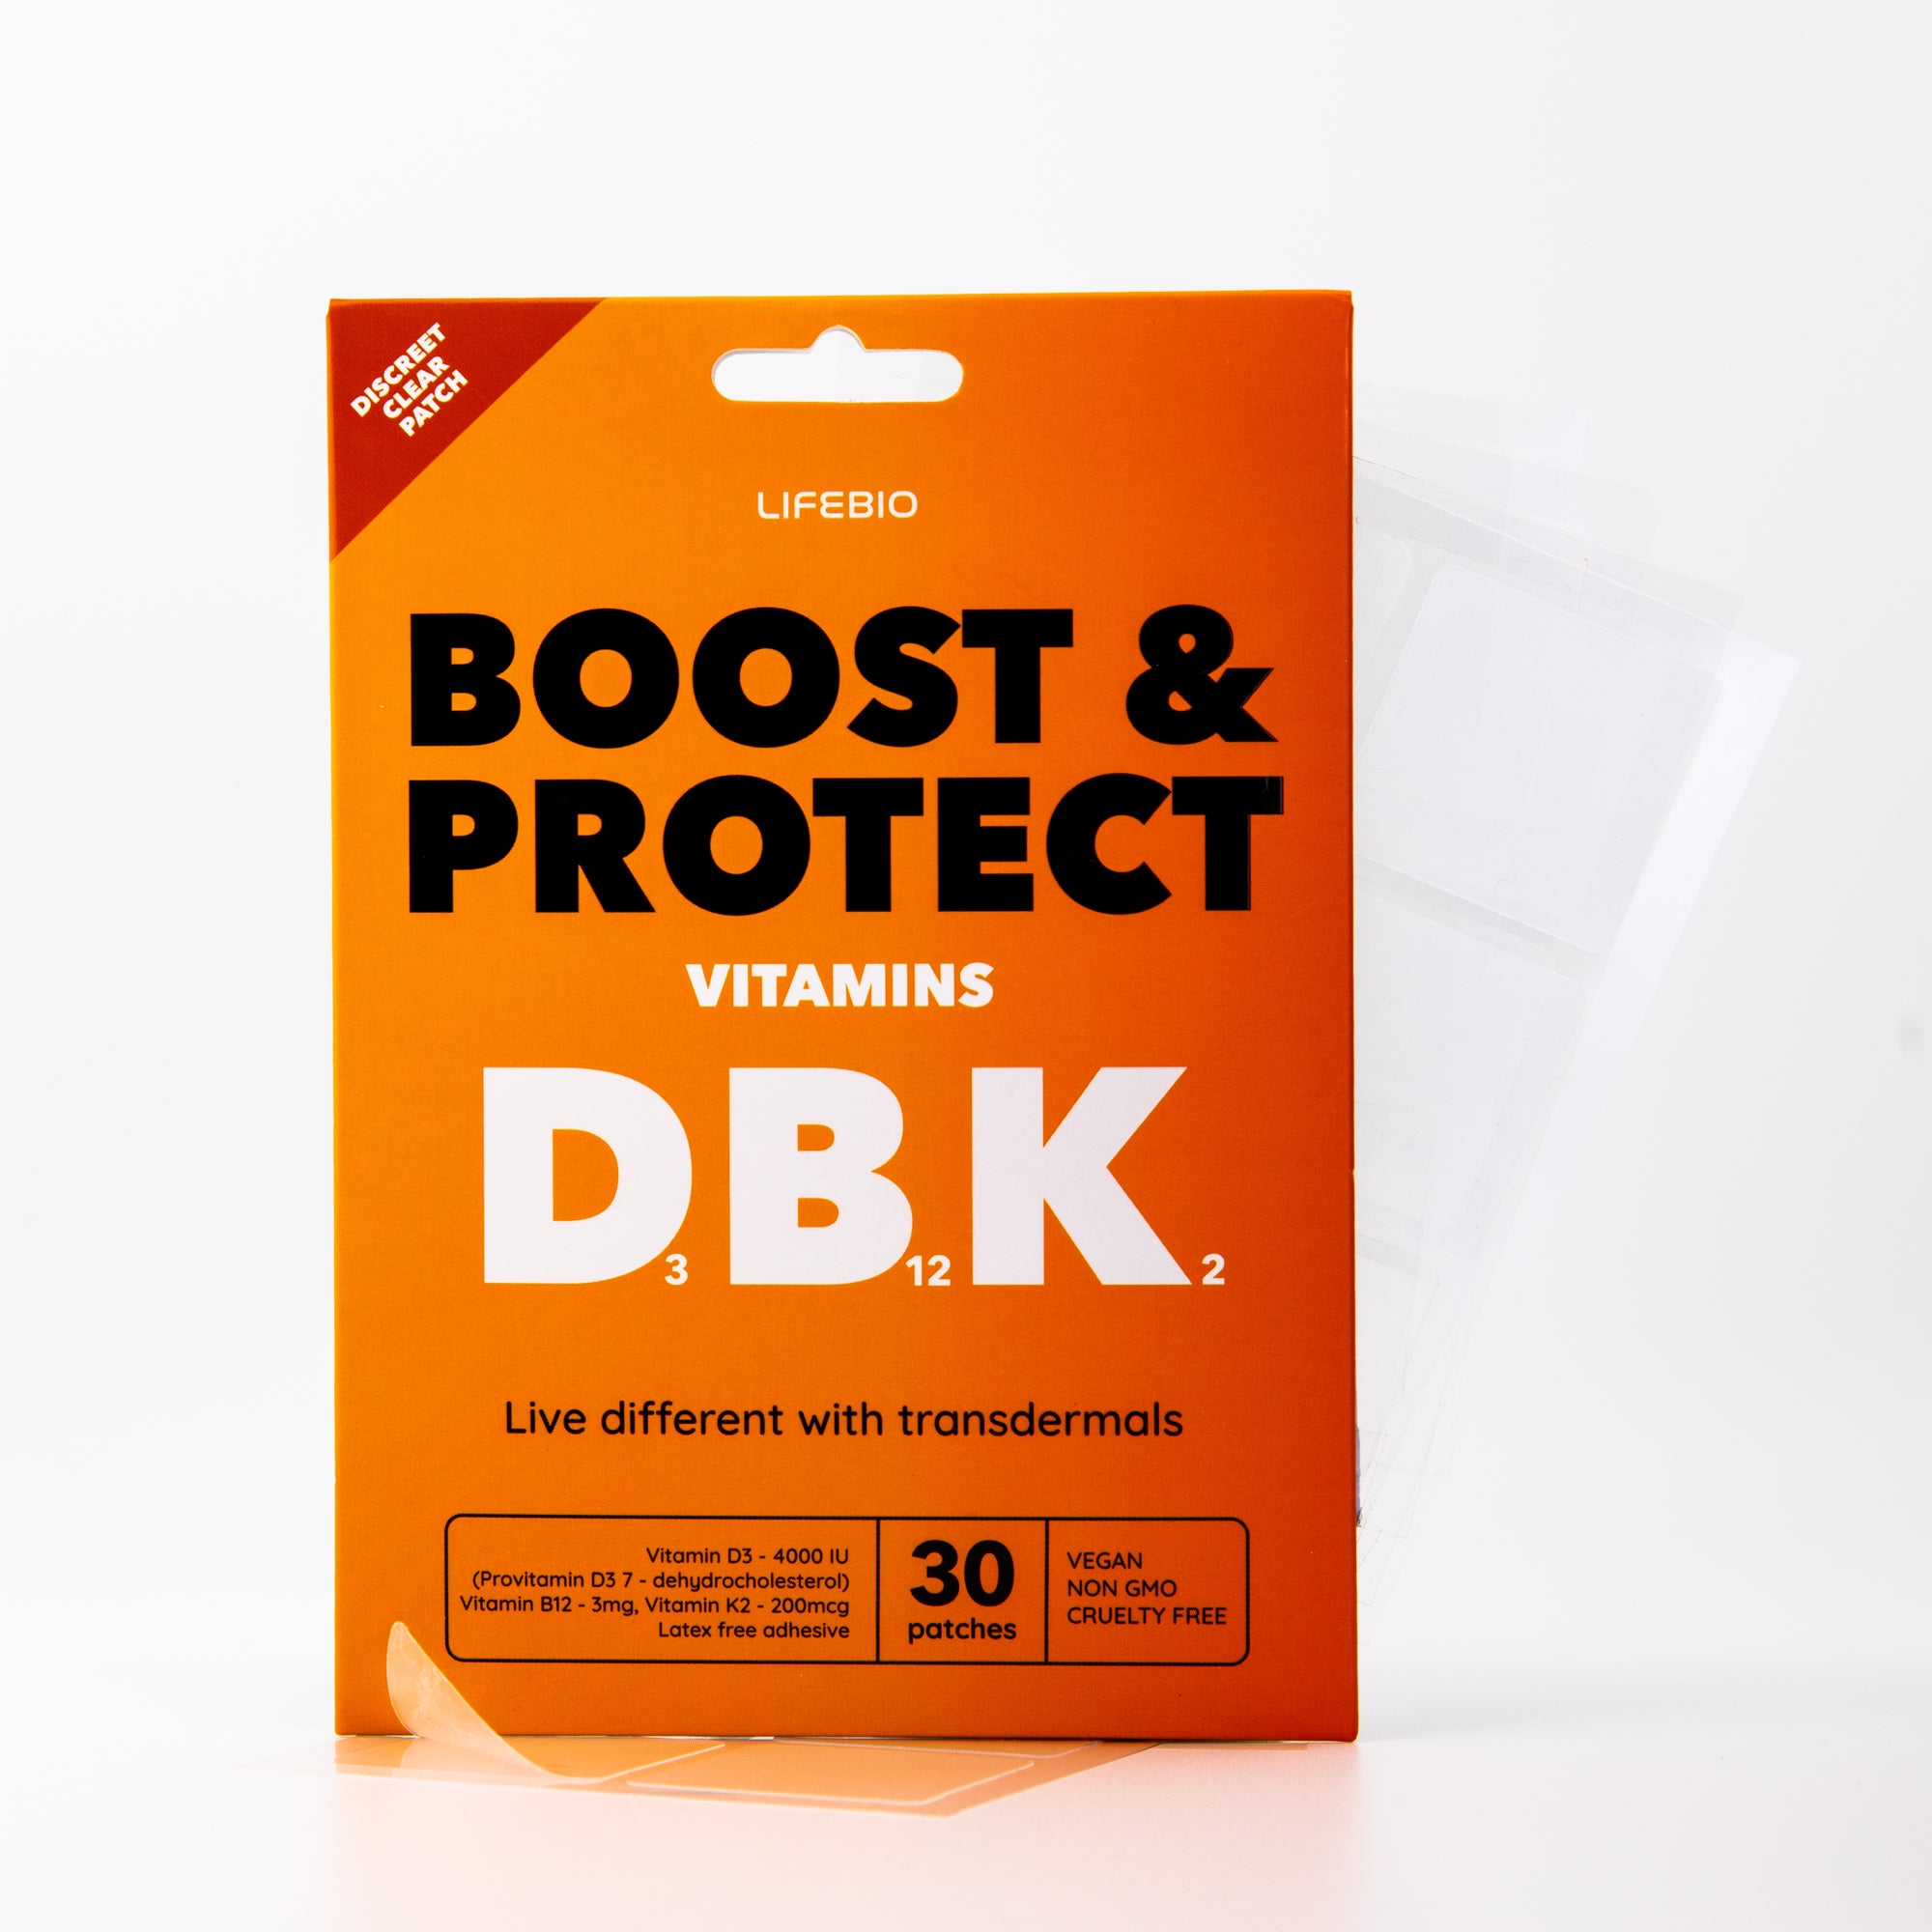 Boost & Protect high dose vitamins D3, B12 and now with added K2